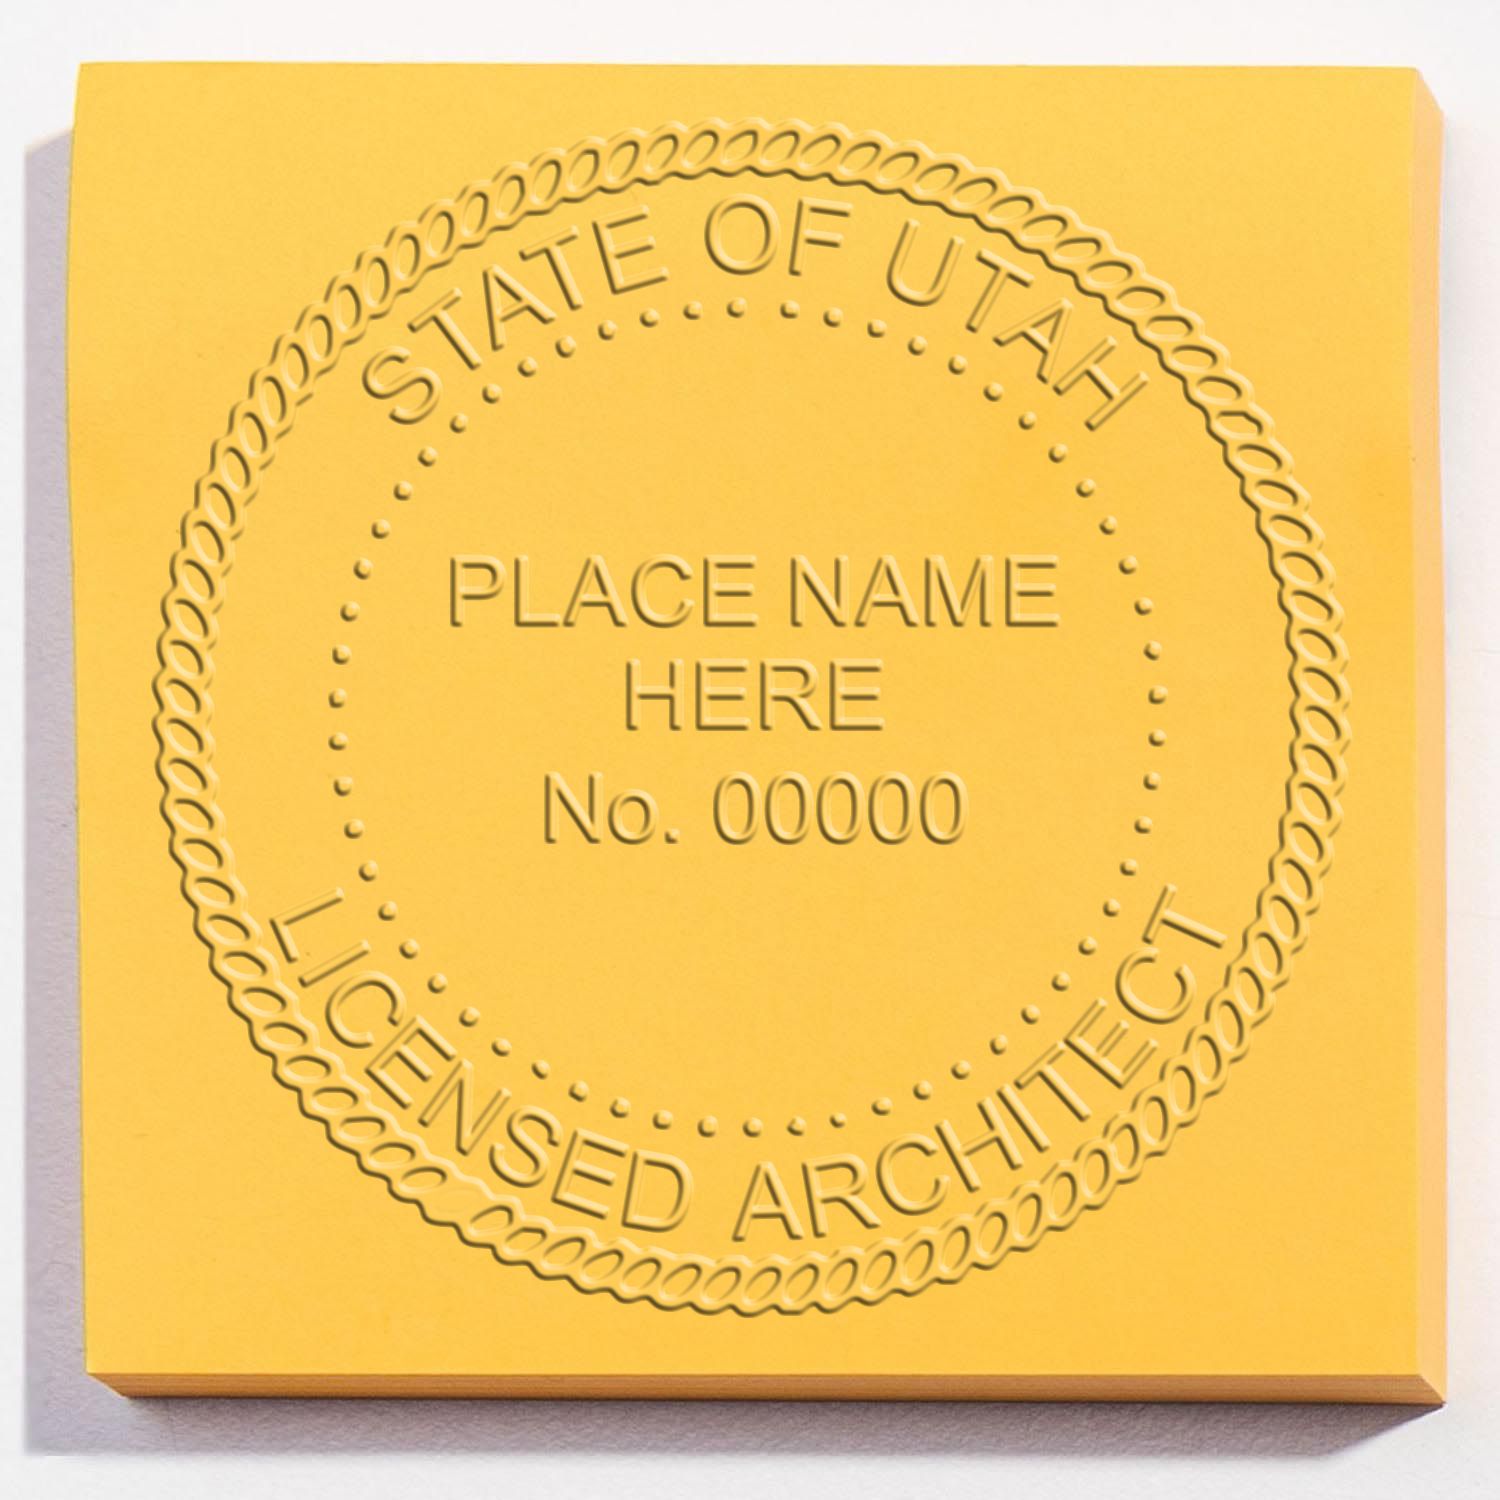 The main image for the Utah Desk Architect Embossing Seal depicting a sample of the imprint and electronic files